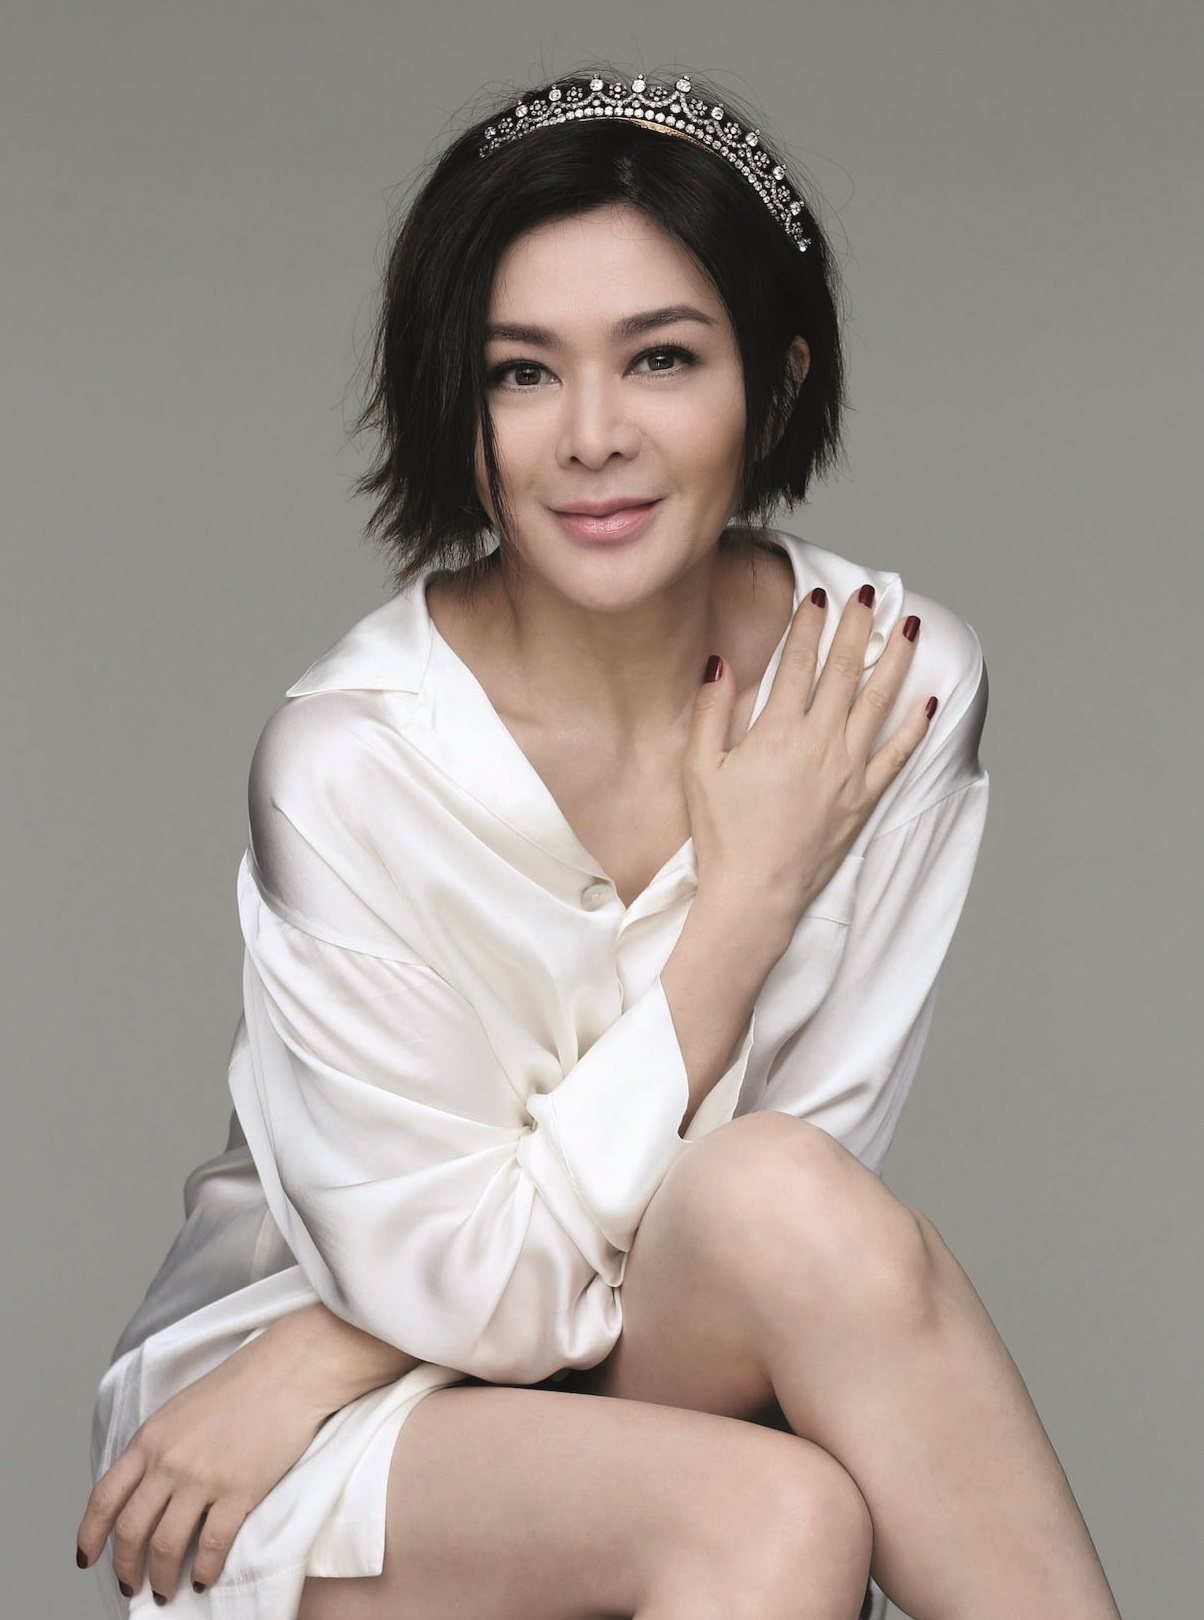 Rosamund Kwan Auctions Us$13 Million Of Jewellery At Christie'S, And Hong  Kong Actress Will Donate Part Of Proceeds To Charity | South China Morning  Post